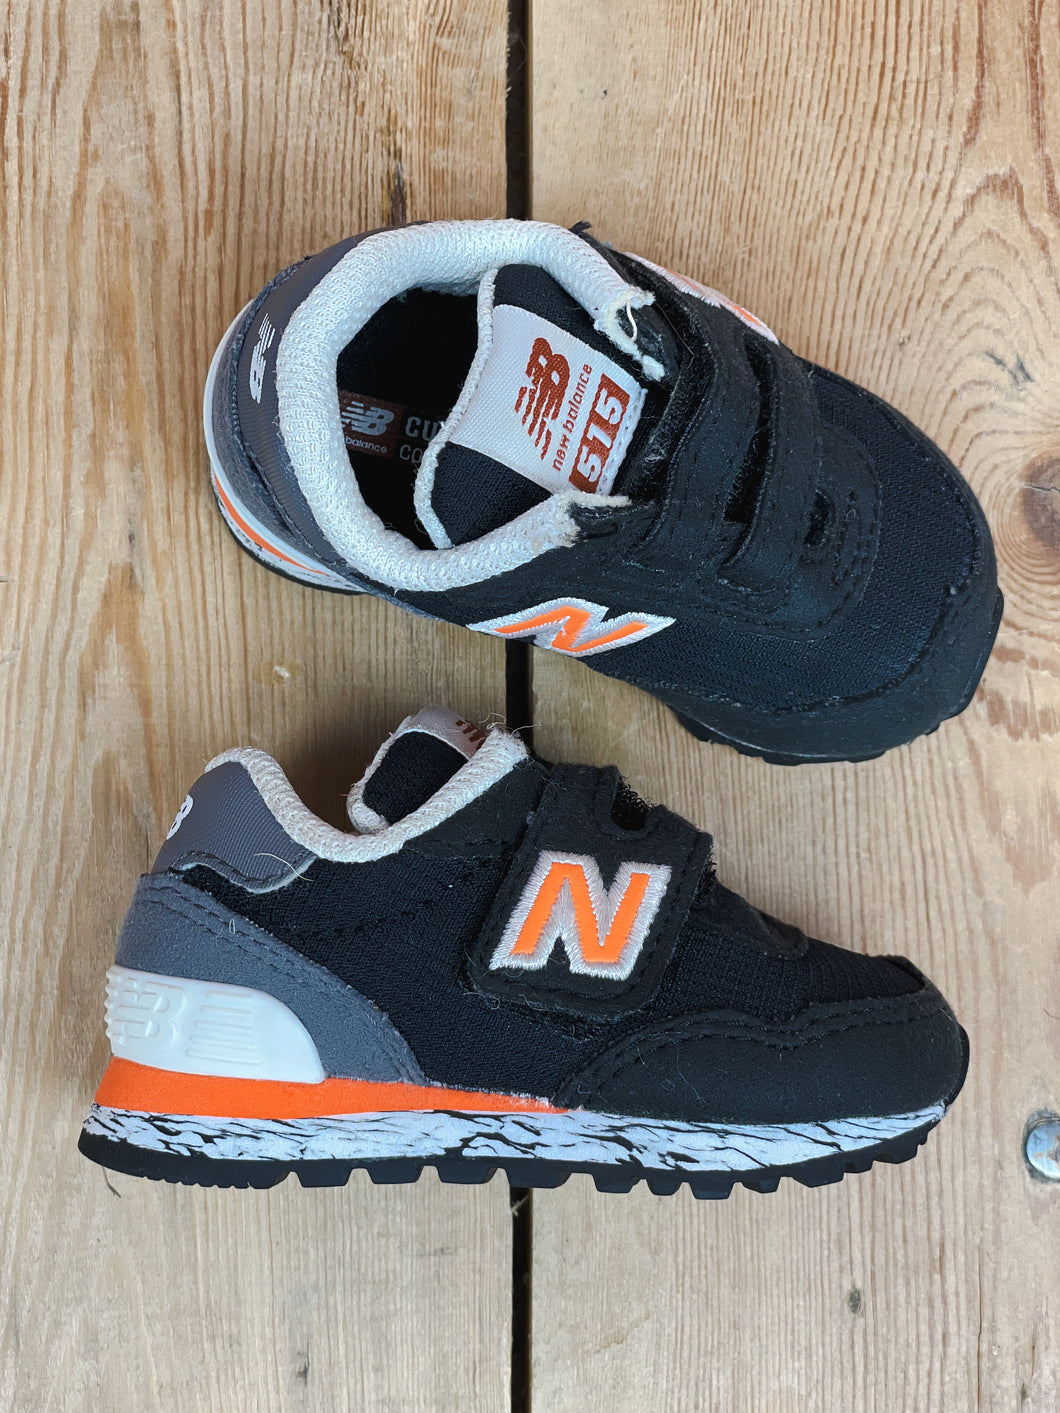 New Balance 515 Trainers - Infant Size 1.5